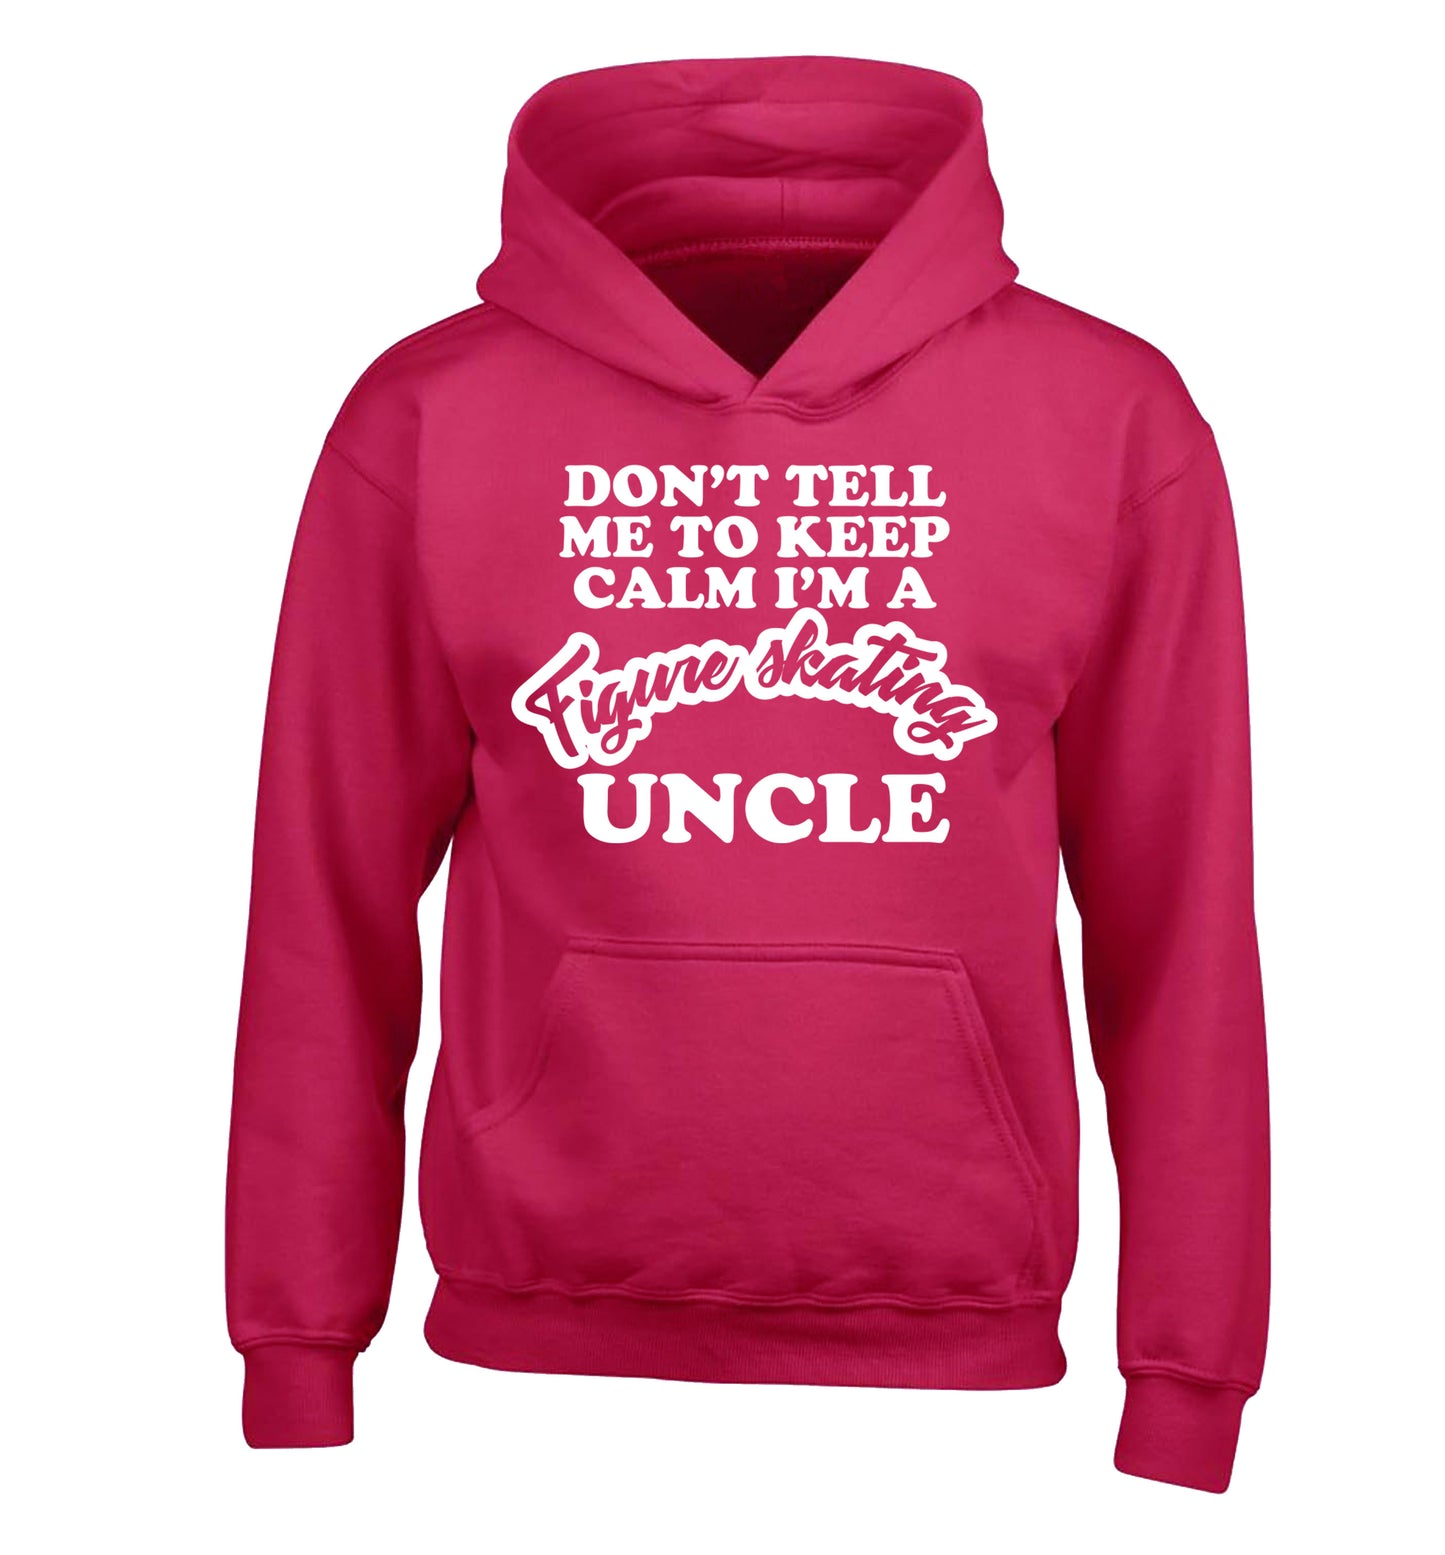 Don't tell me to keep calm I'm a figure skating uncle children's pink hoodie 12-14 Years